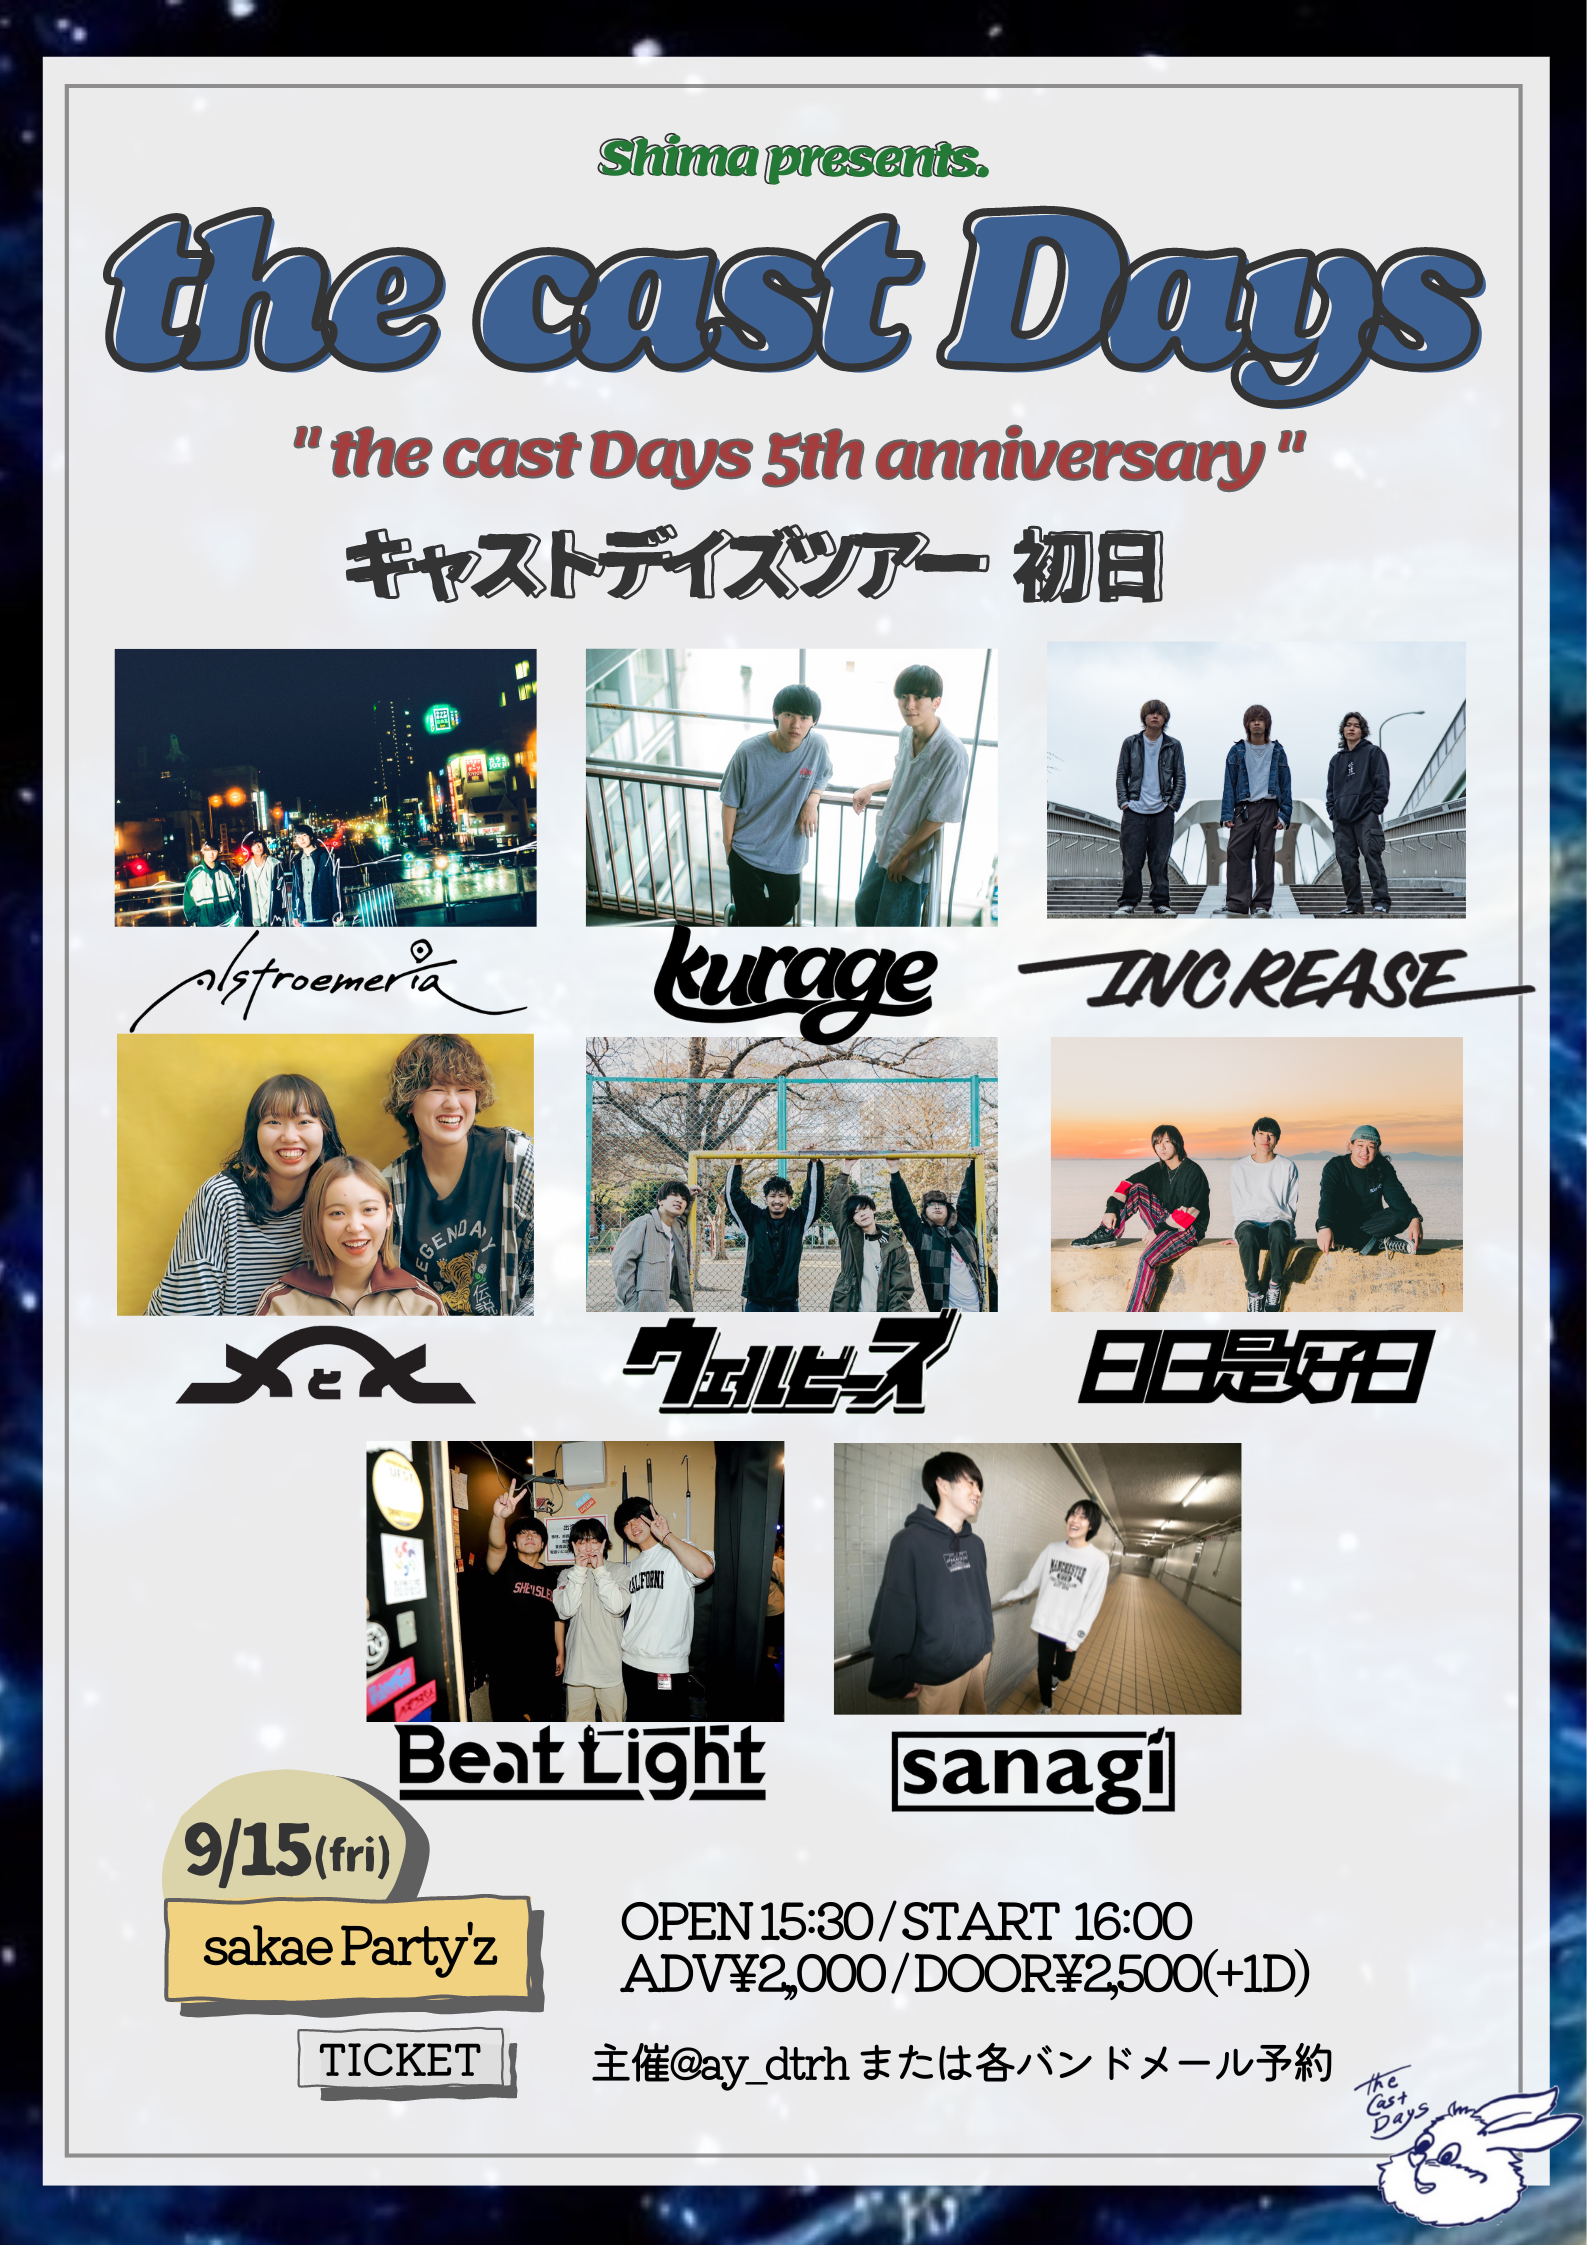 「the cast Days」 "the cast Days 5th anniversary" キャストデイズツアー 初日